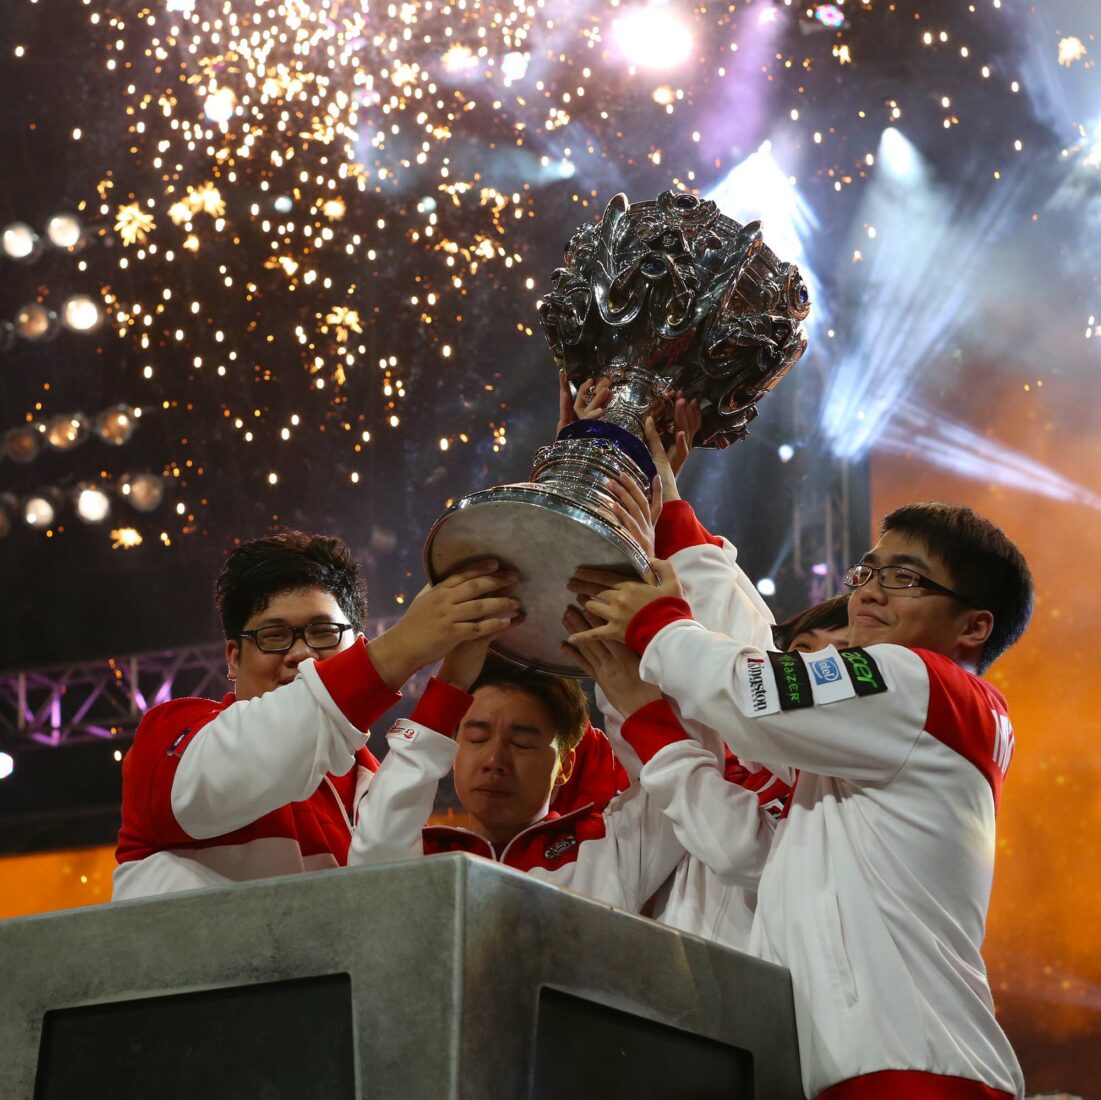 Worlds 2022, The Summoner's Cup and Esports - Thomas Lyte